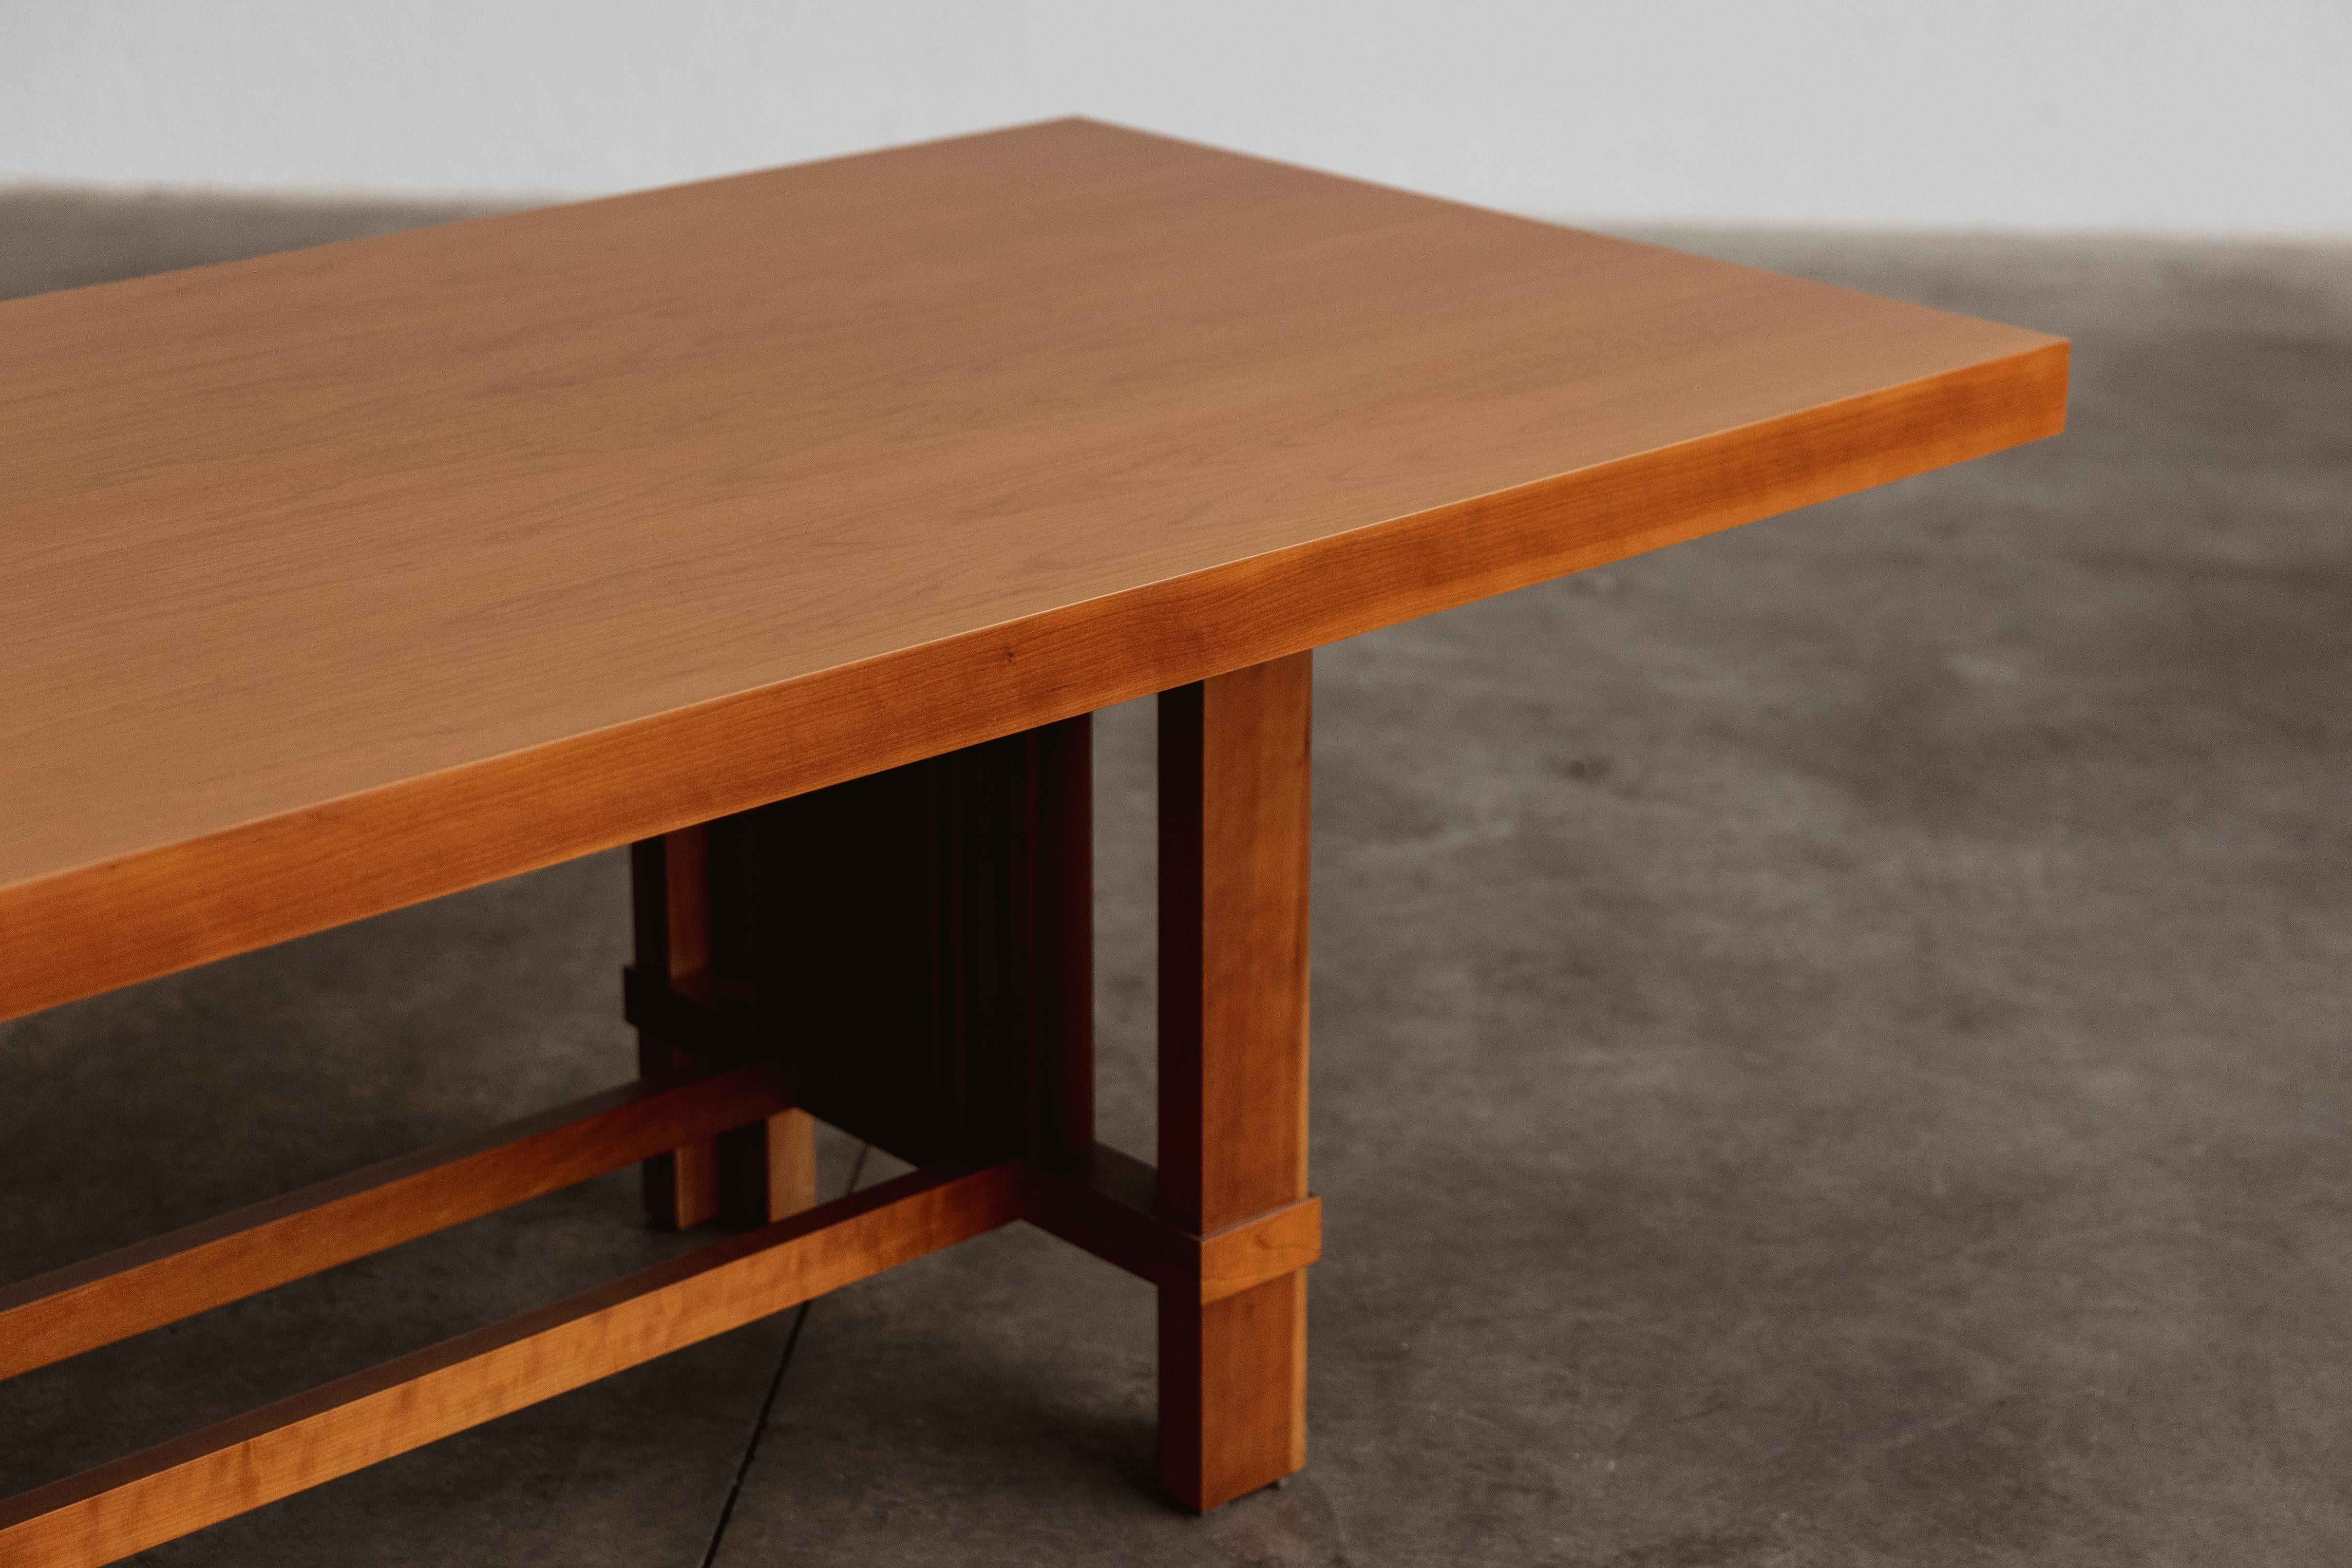 Frank Lloyd Wright “608 Taliesin” Dining Table for Cassina, 1986 For Sale 2